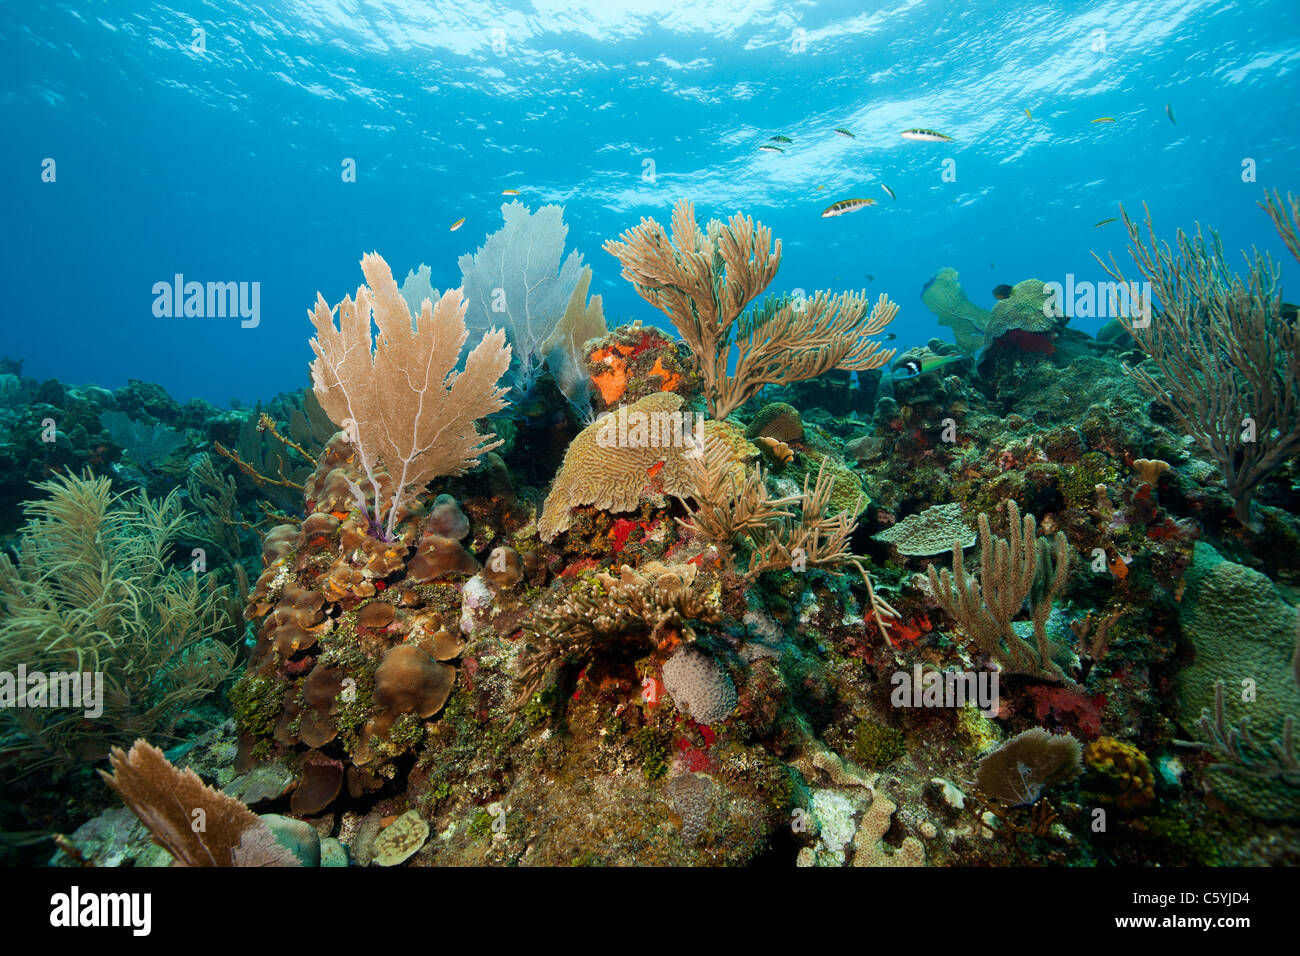 Common Sea Fan (Gorgonia ventalina) and other corals and sponges on a tropical reef off the island of Roatan, Honduras. Stock Photo